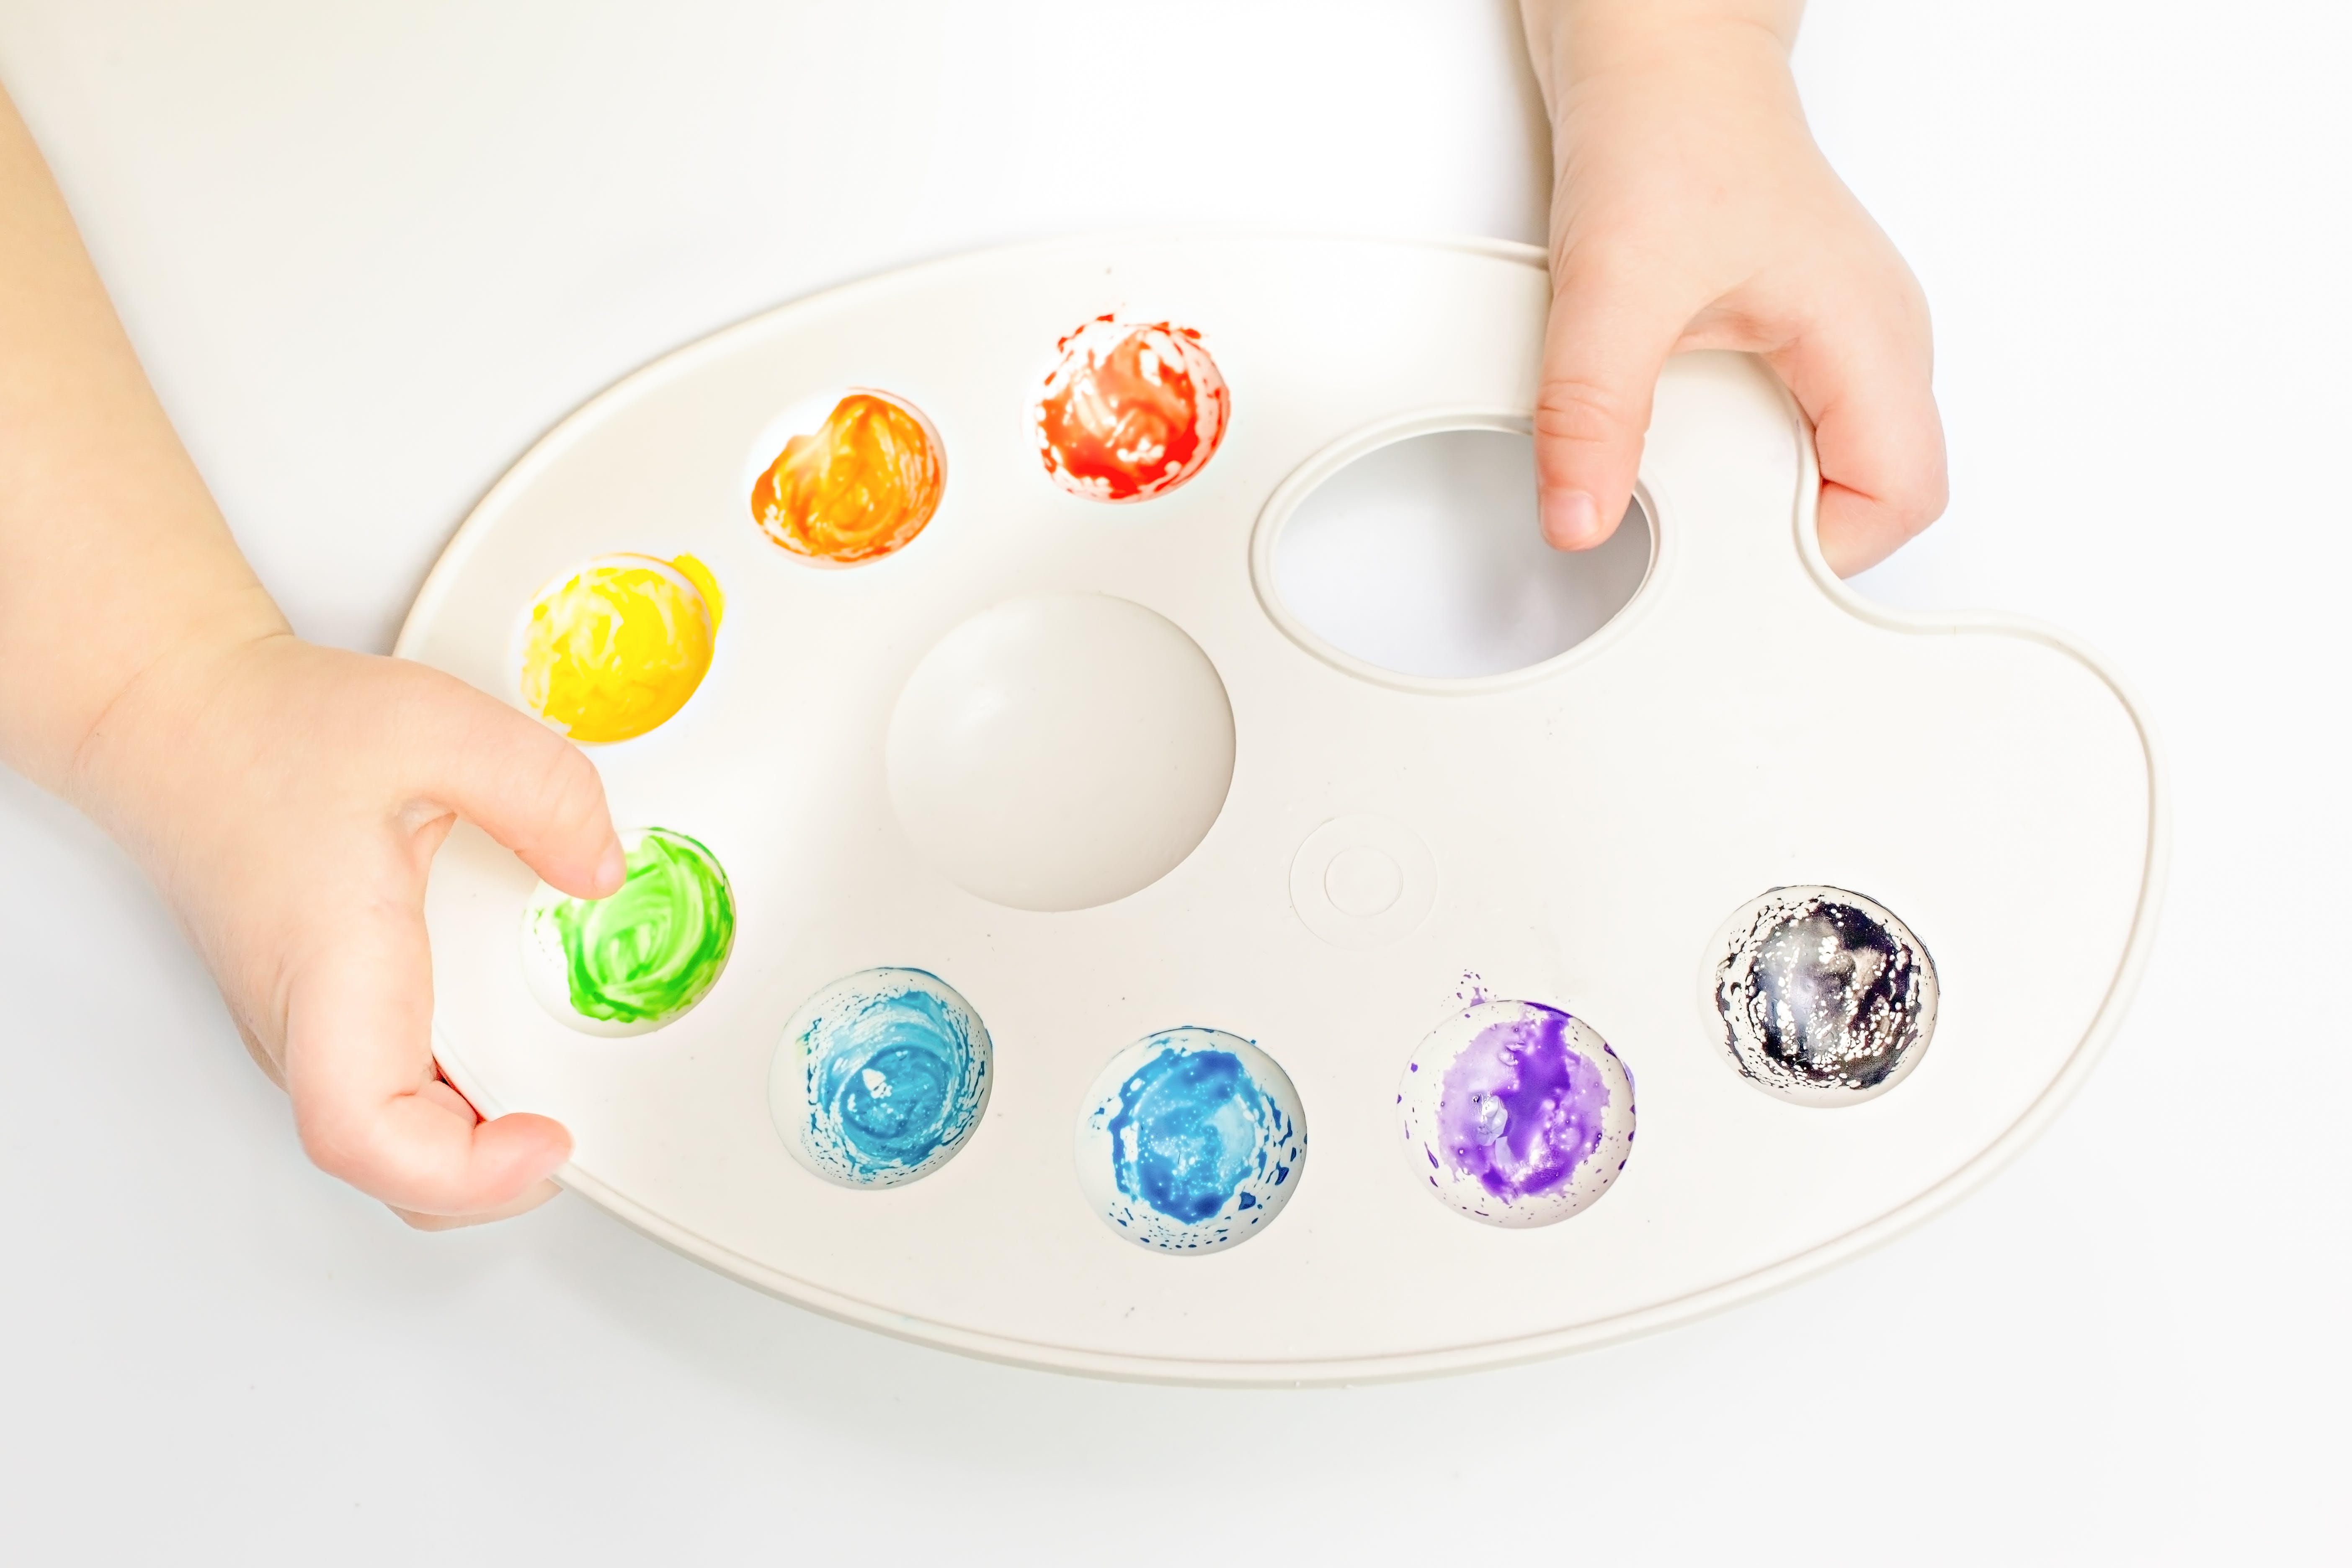 A paint palette is held by a child.